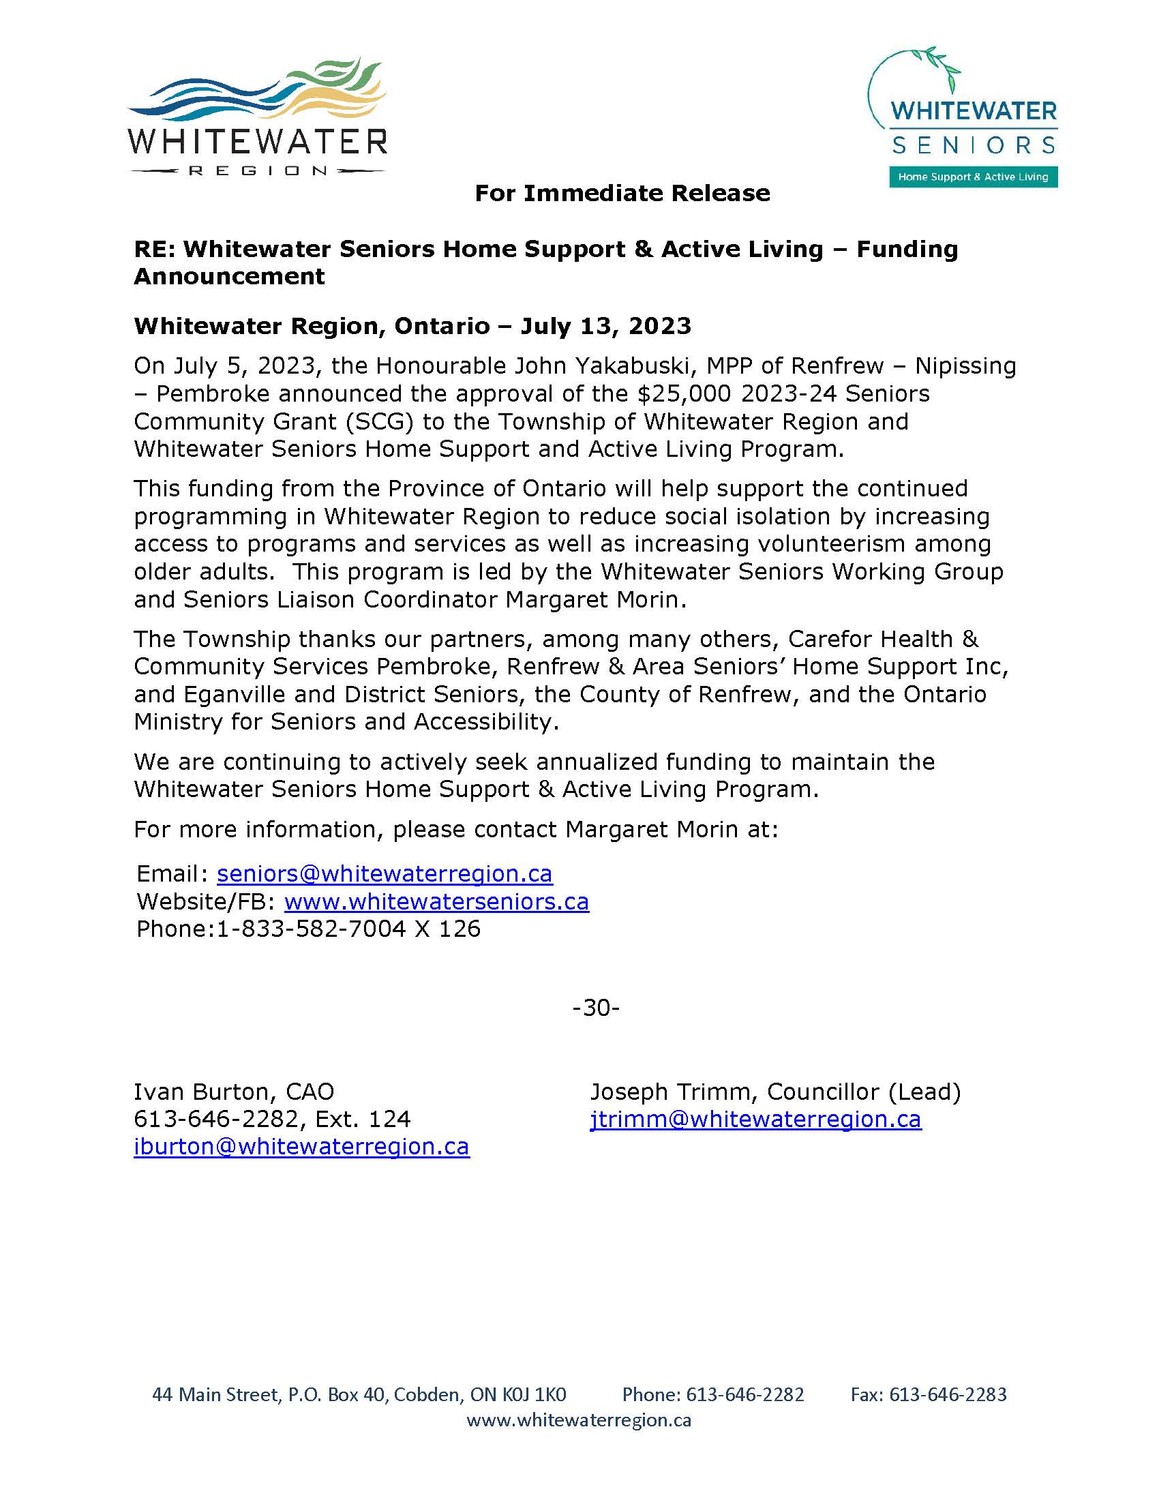 Whitewater Seniors Home Support & Active Living Funding Announcement